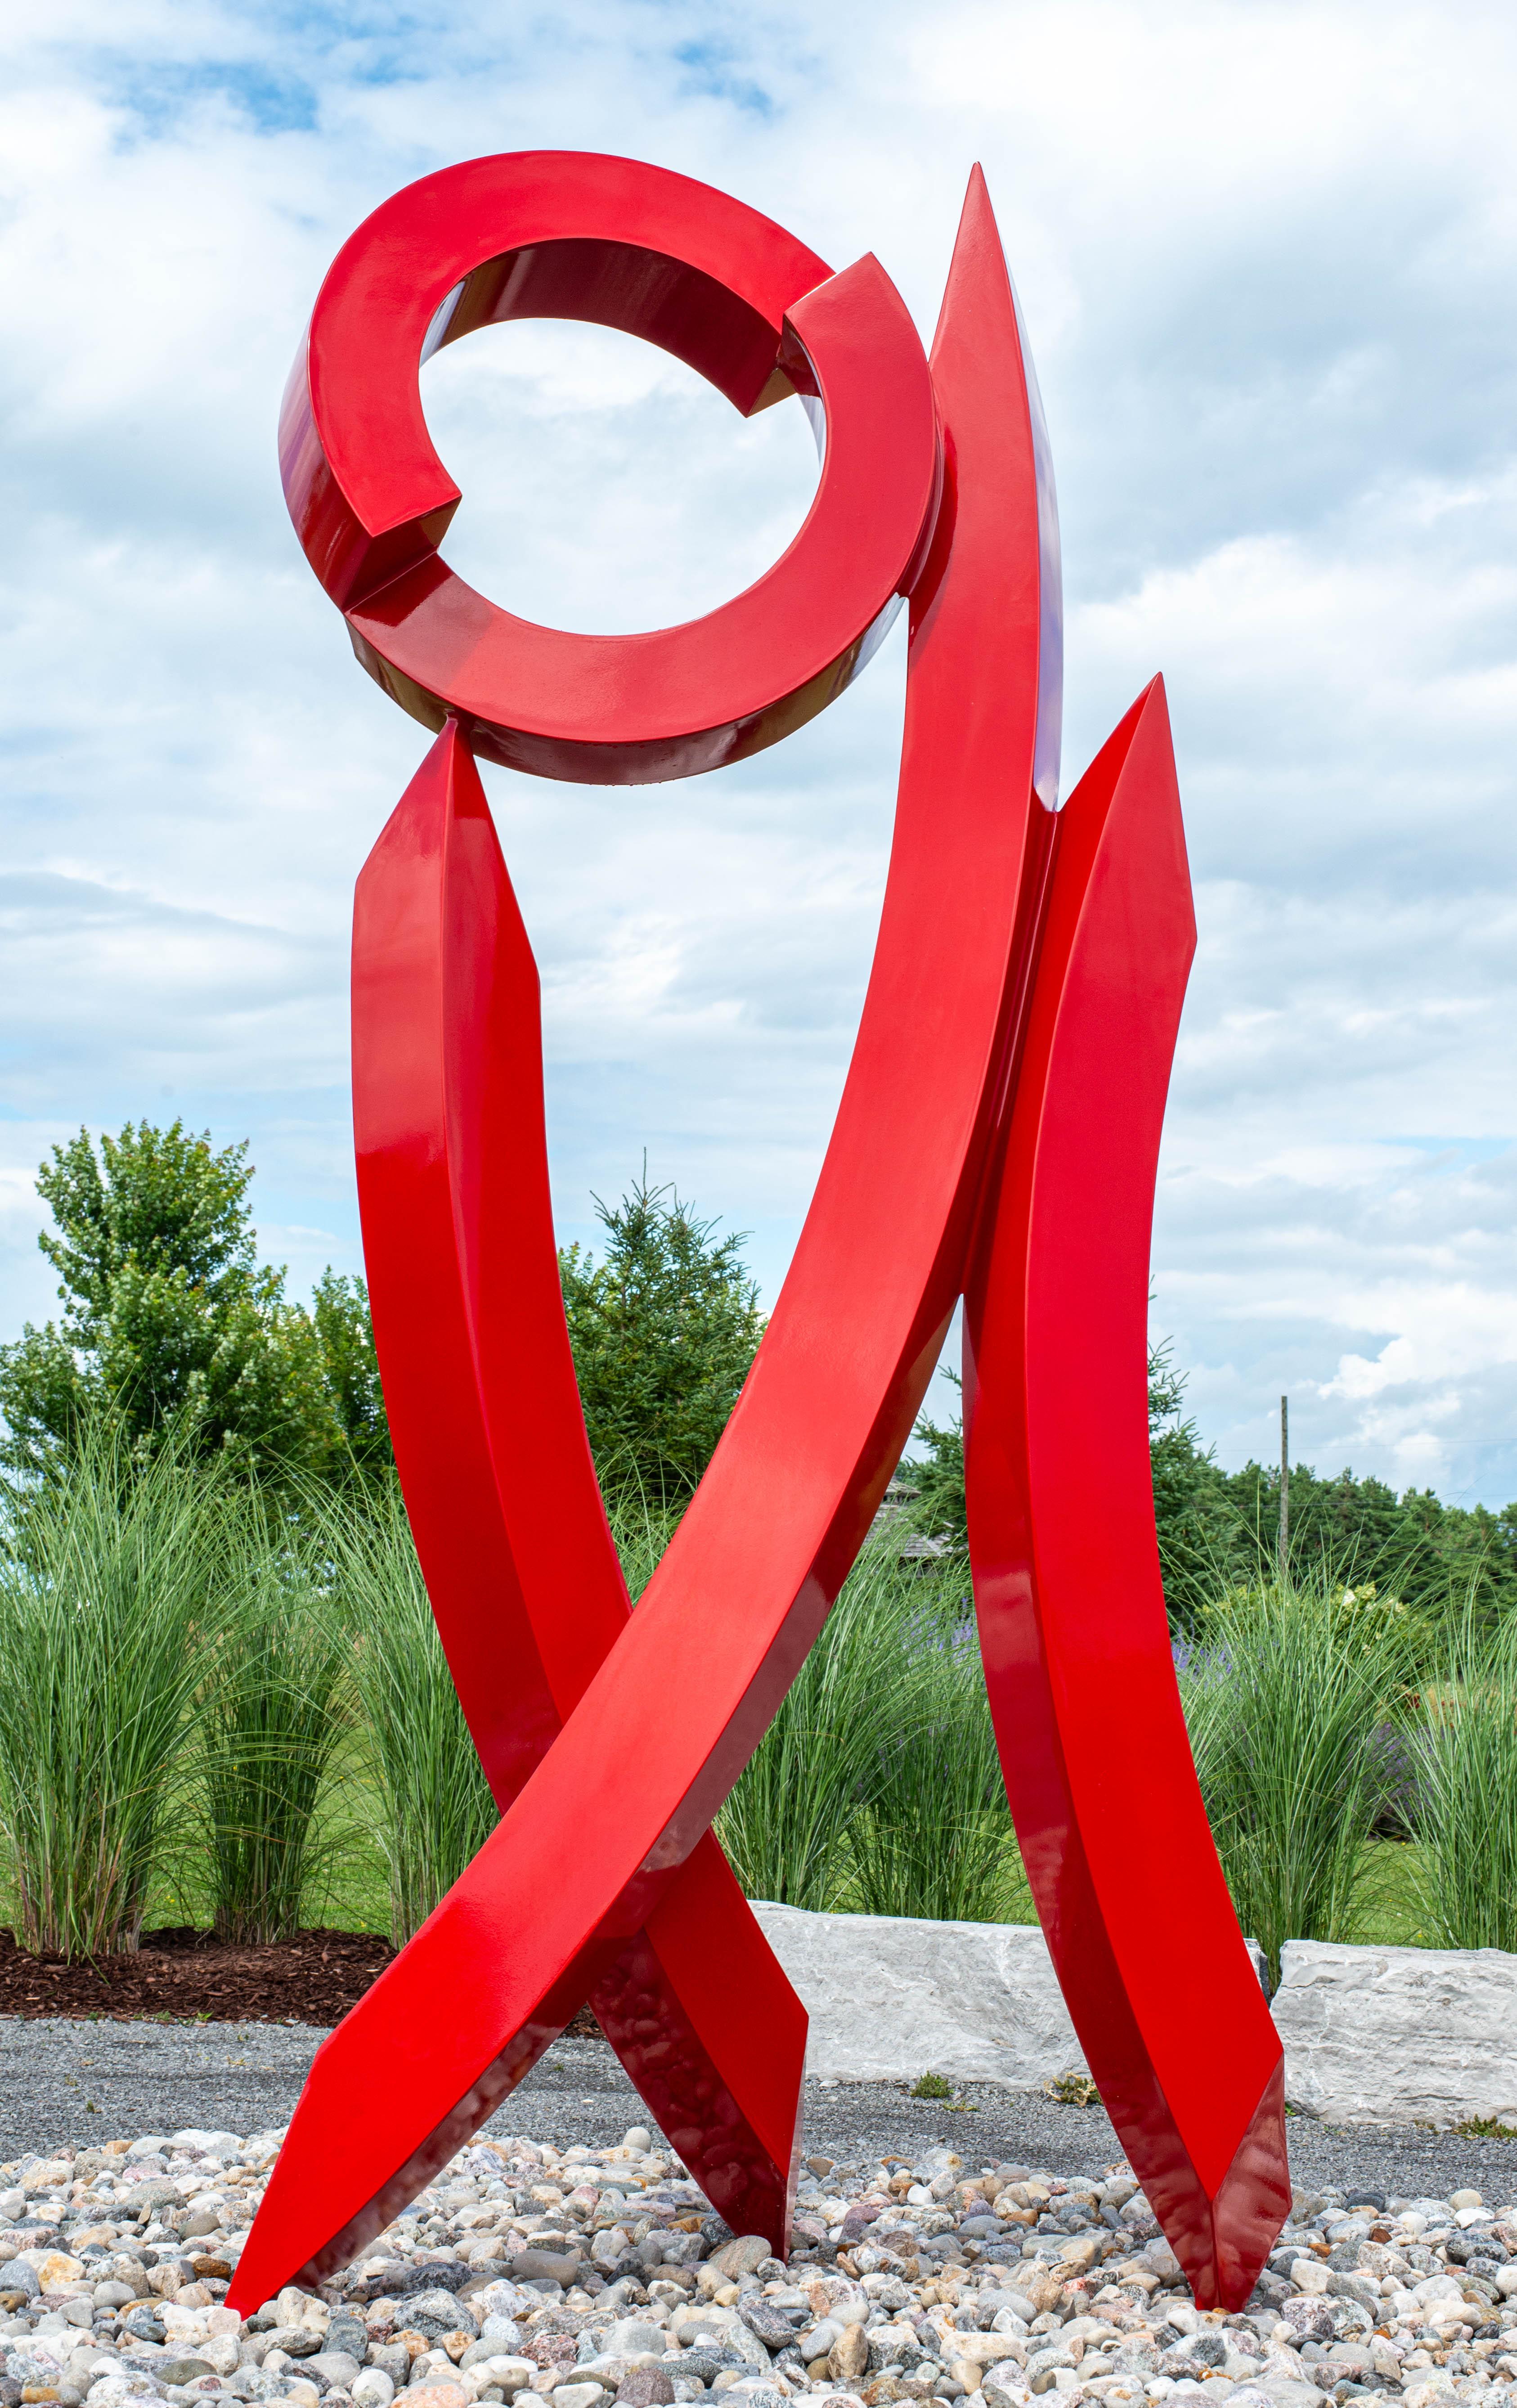 Summer Red Rhythm - contemporary, abstract, stainless steel outdoor sculpture - Sculpture by Rob Lorenson